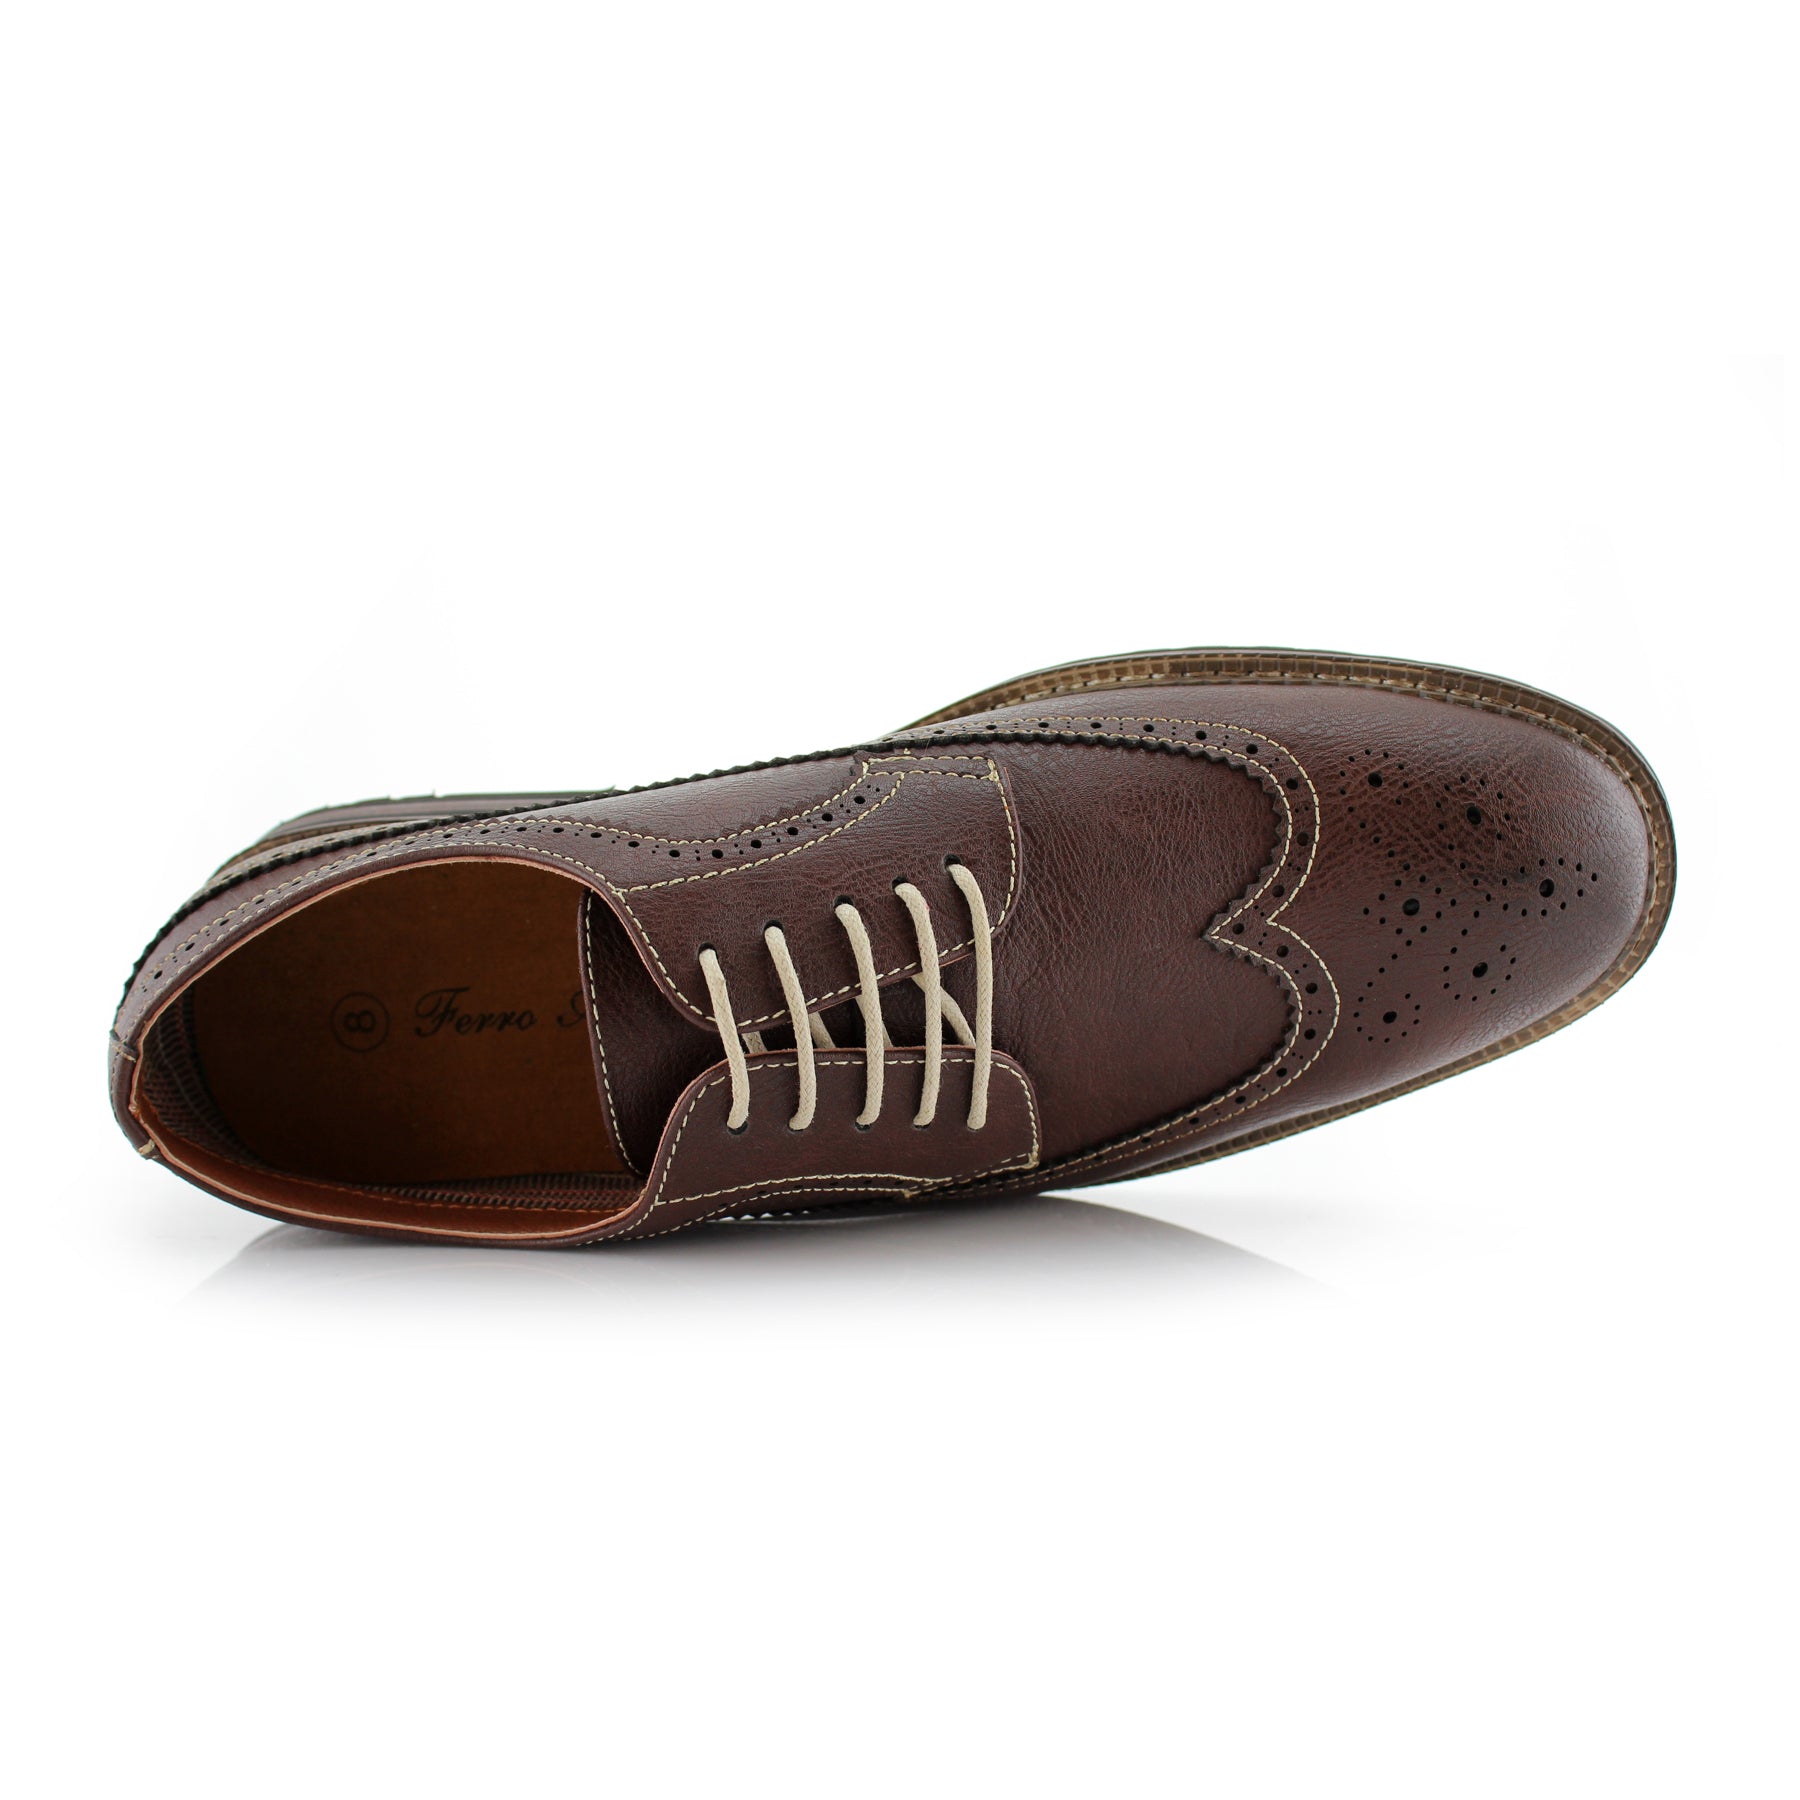 Longwing Brogue Derby Shoes | Phillip by Ferro Aldo | Conal Footwear | Top-Down Angle View